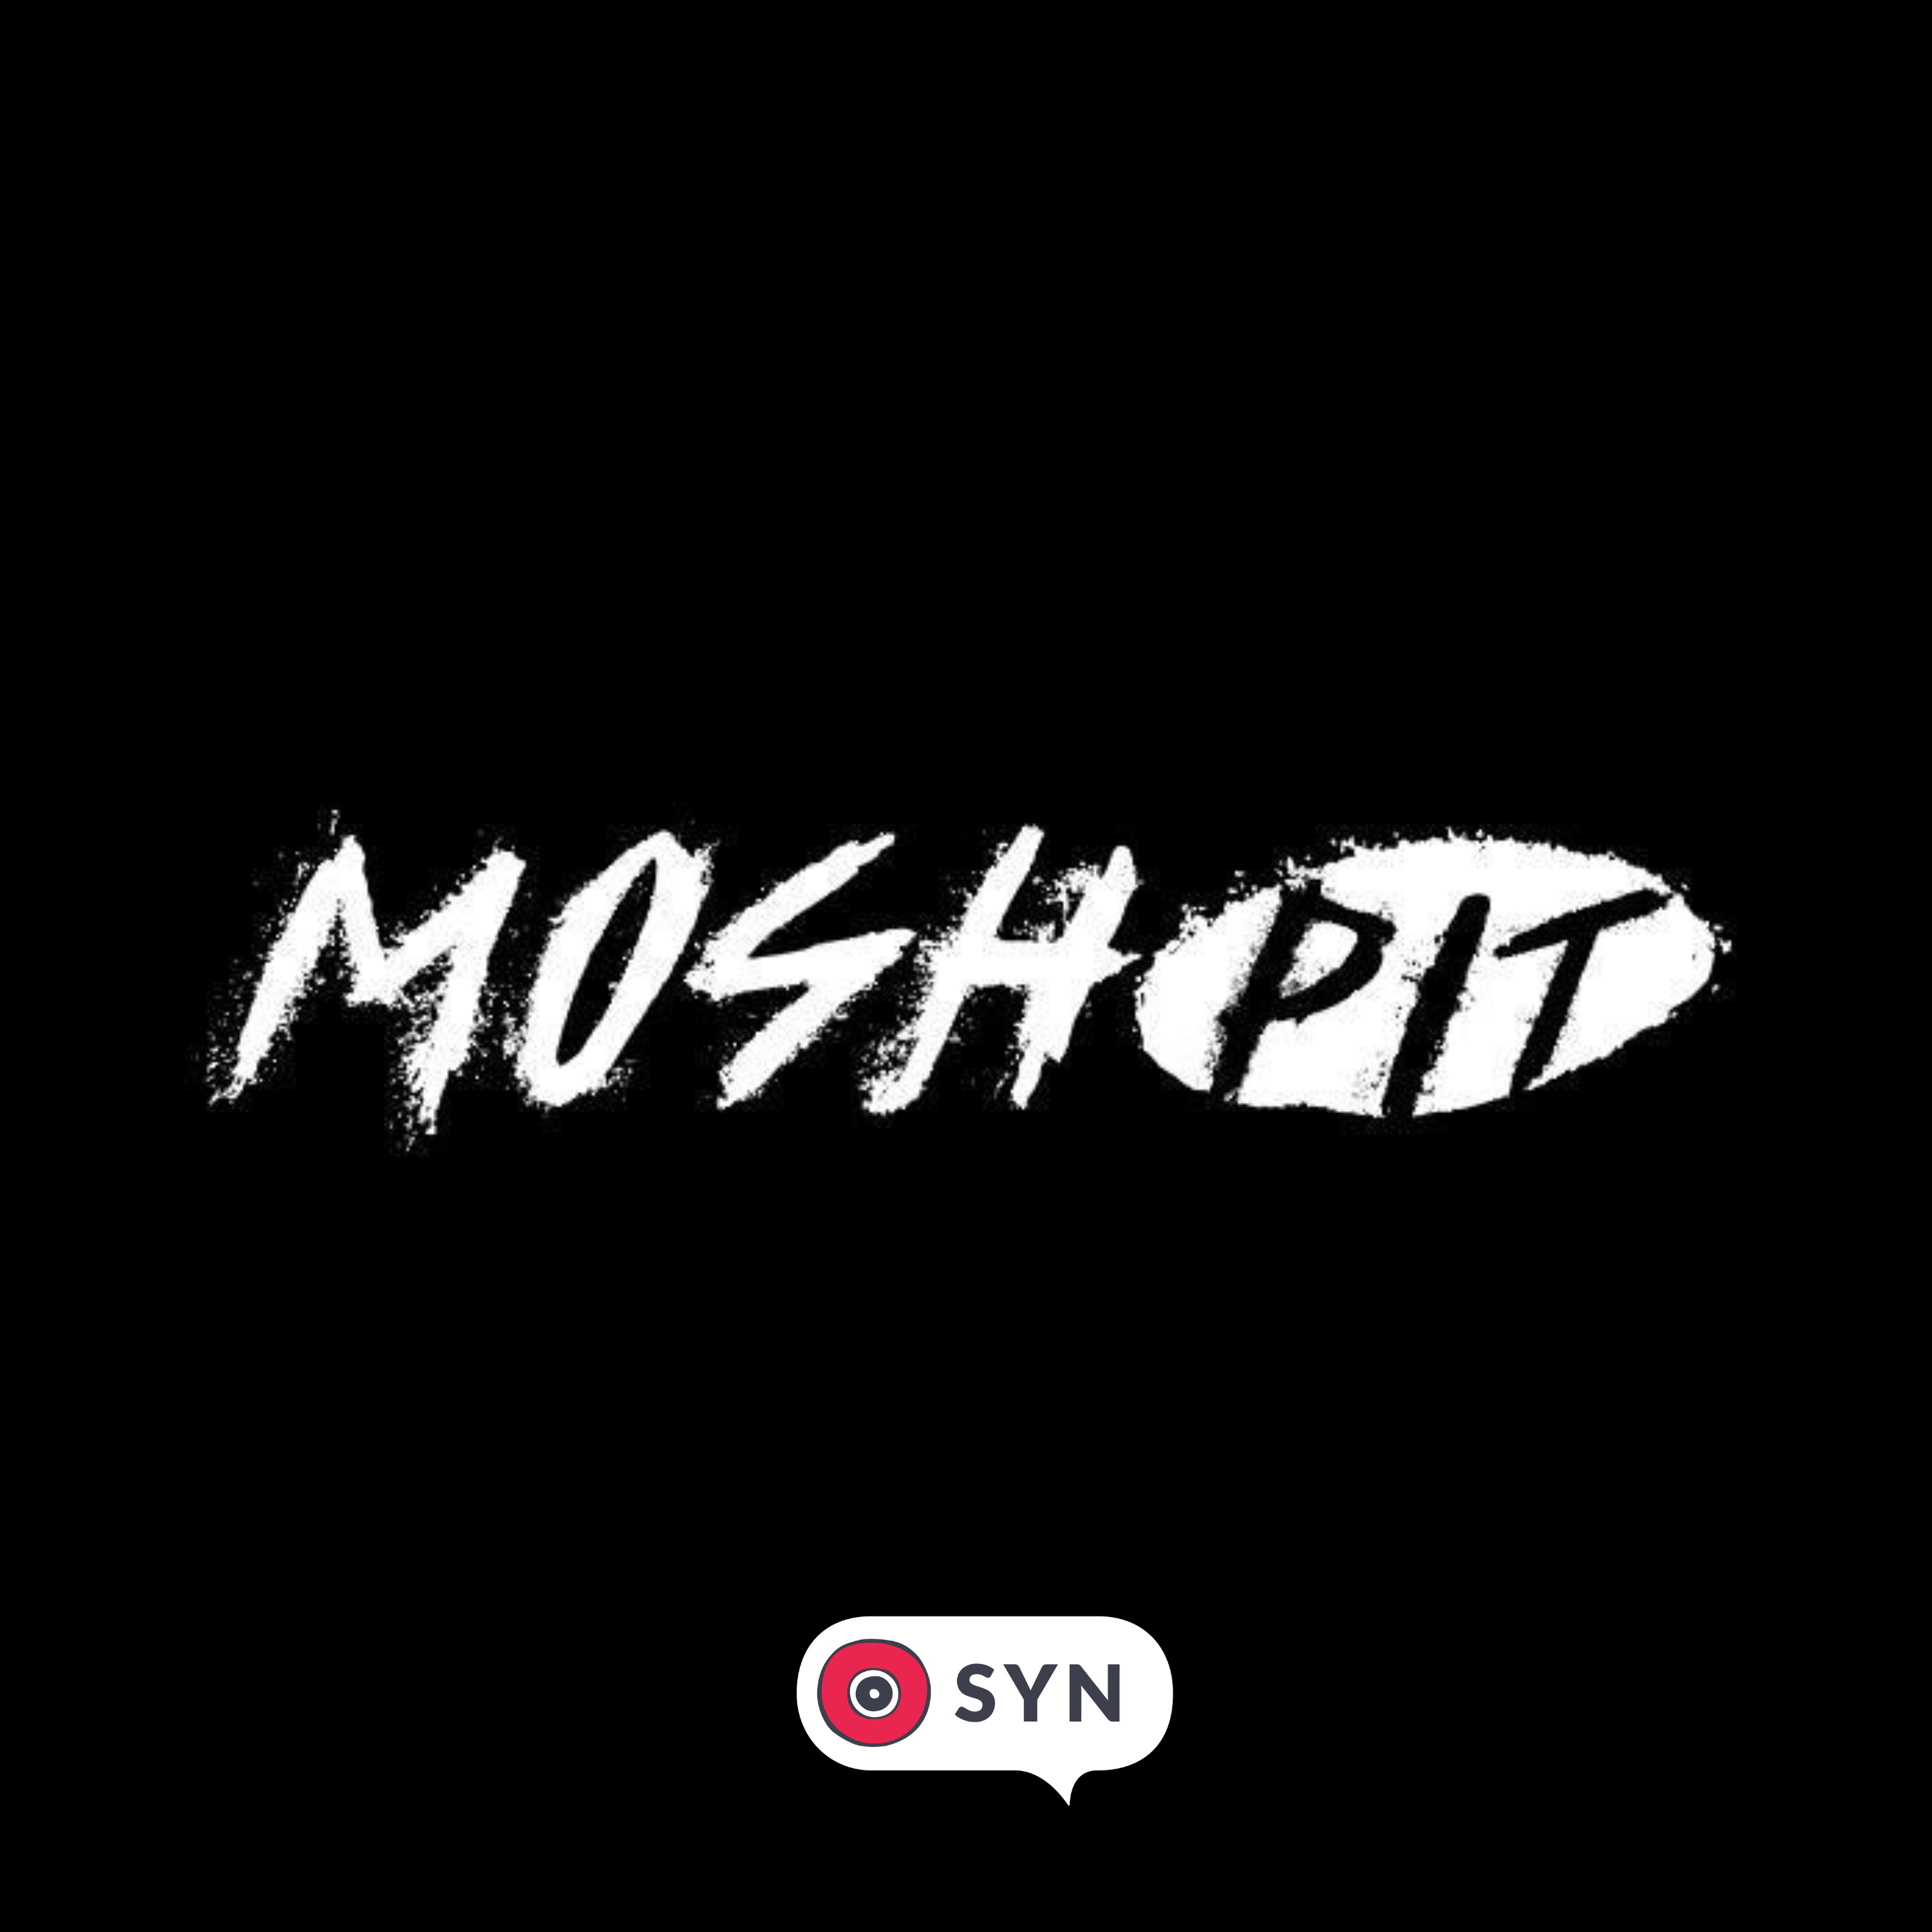 Moshpit On SYN - 16/07/20 FULL SHOW